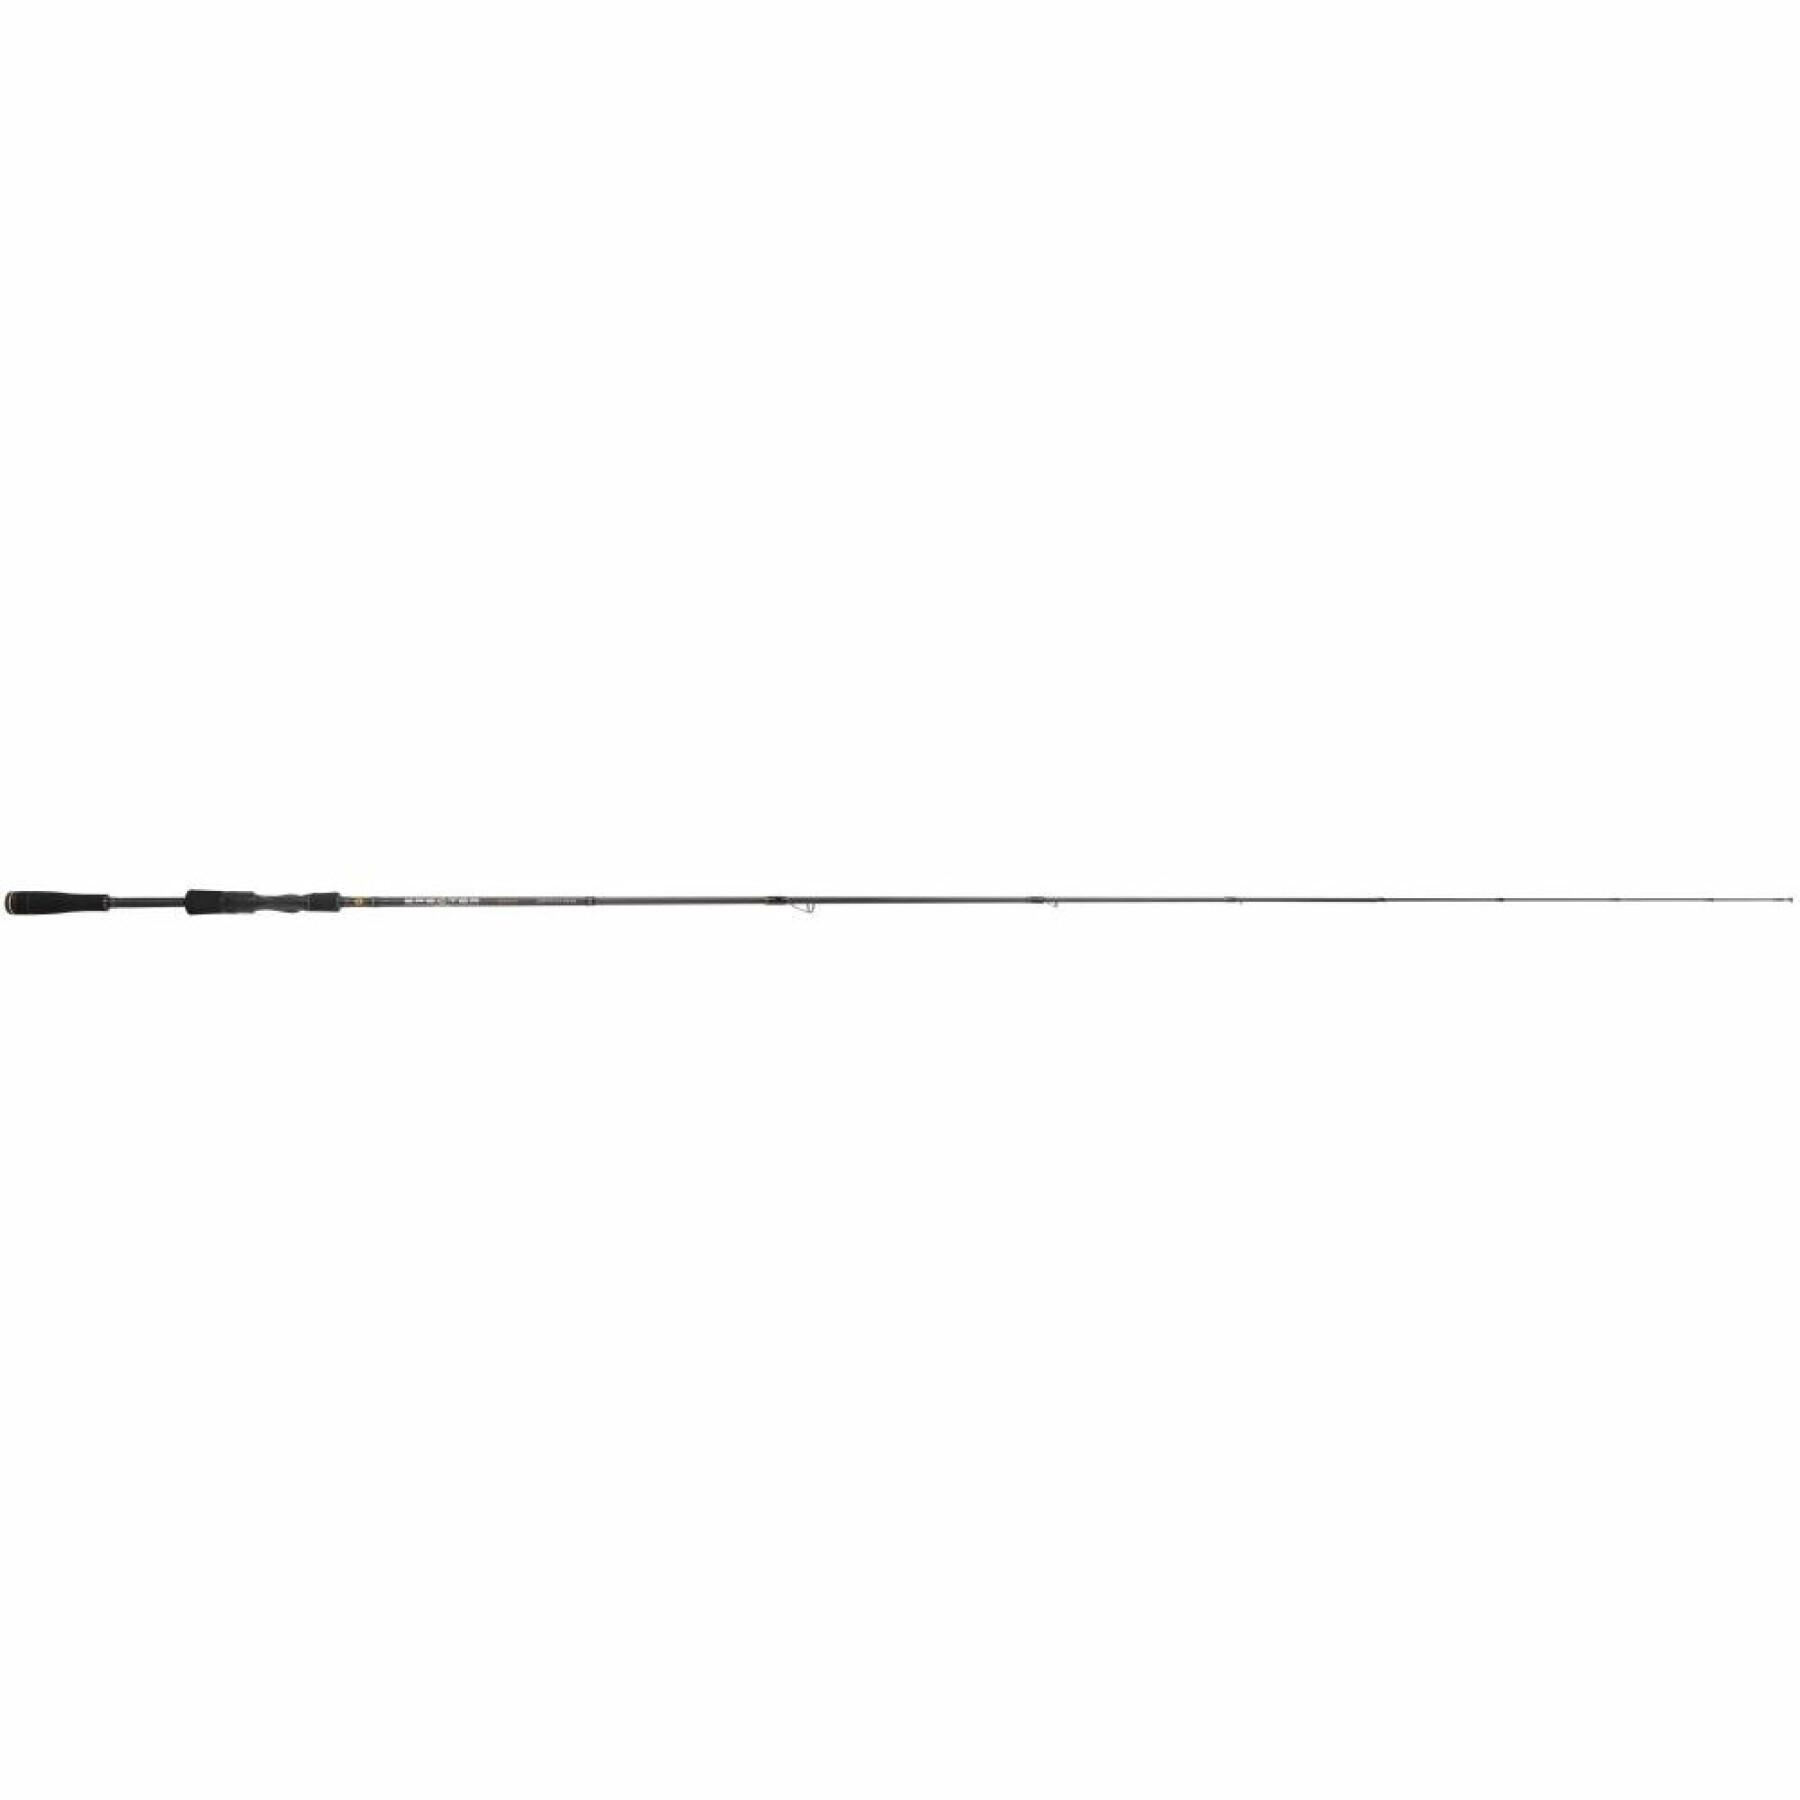 Canne casting Spro specter fin 10-28g